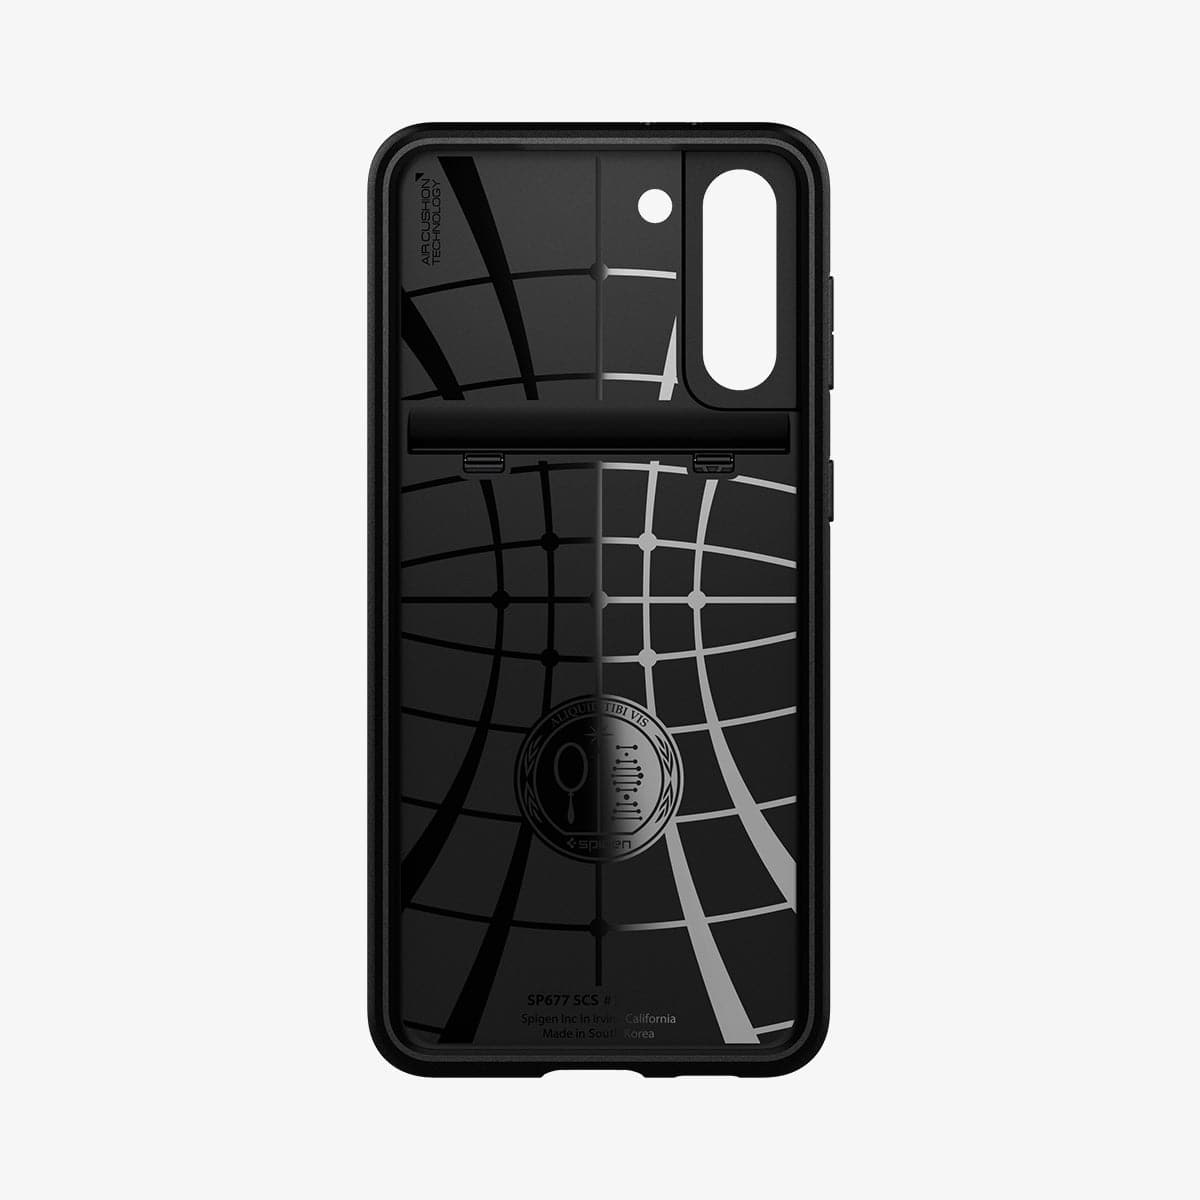 ACS02428 - Galaxy S21 Slim Armor CS Case in black showing the inside of case